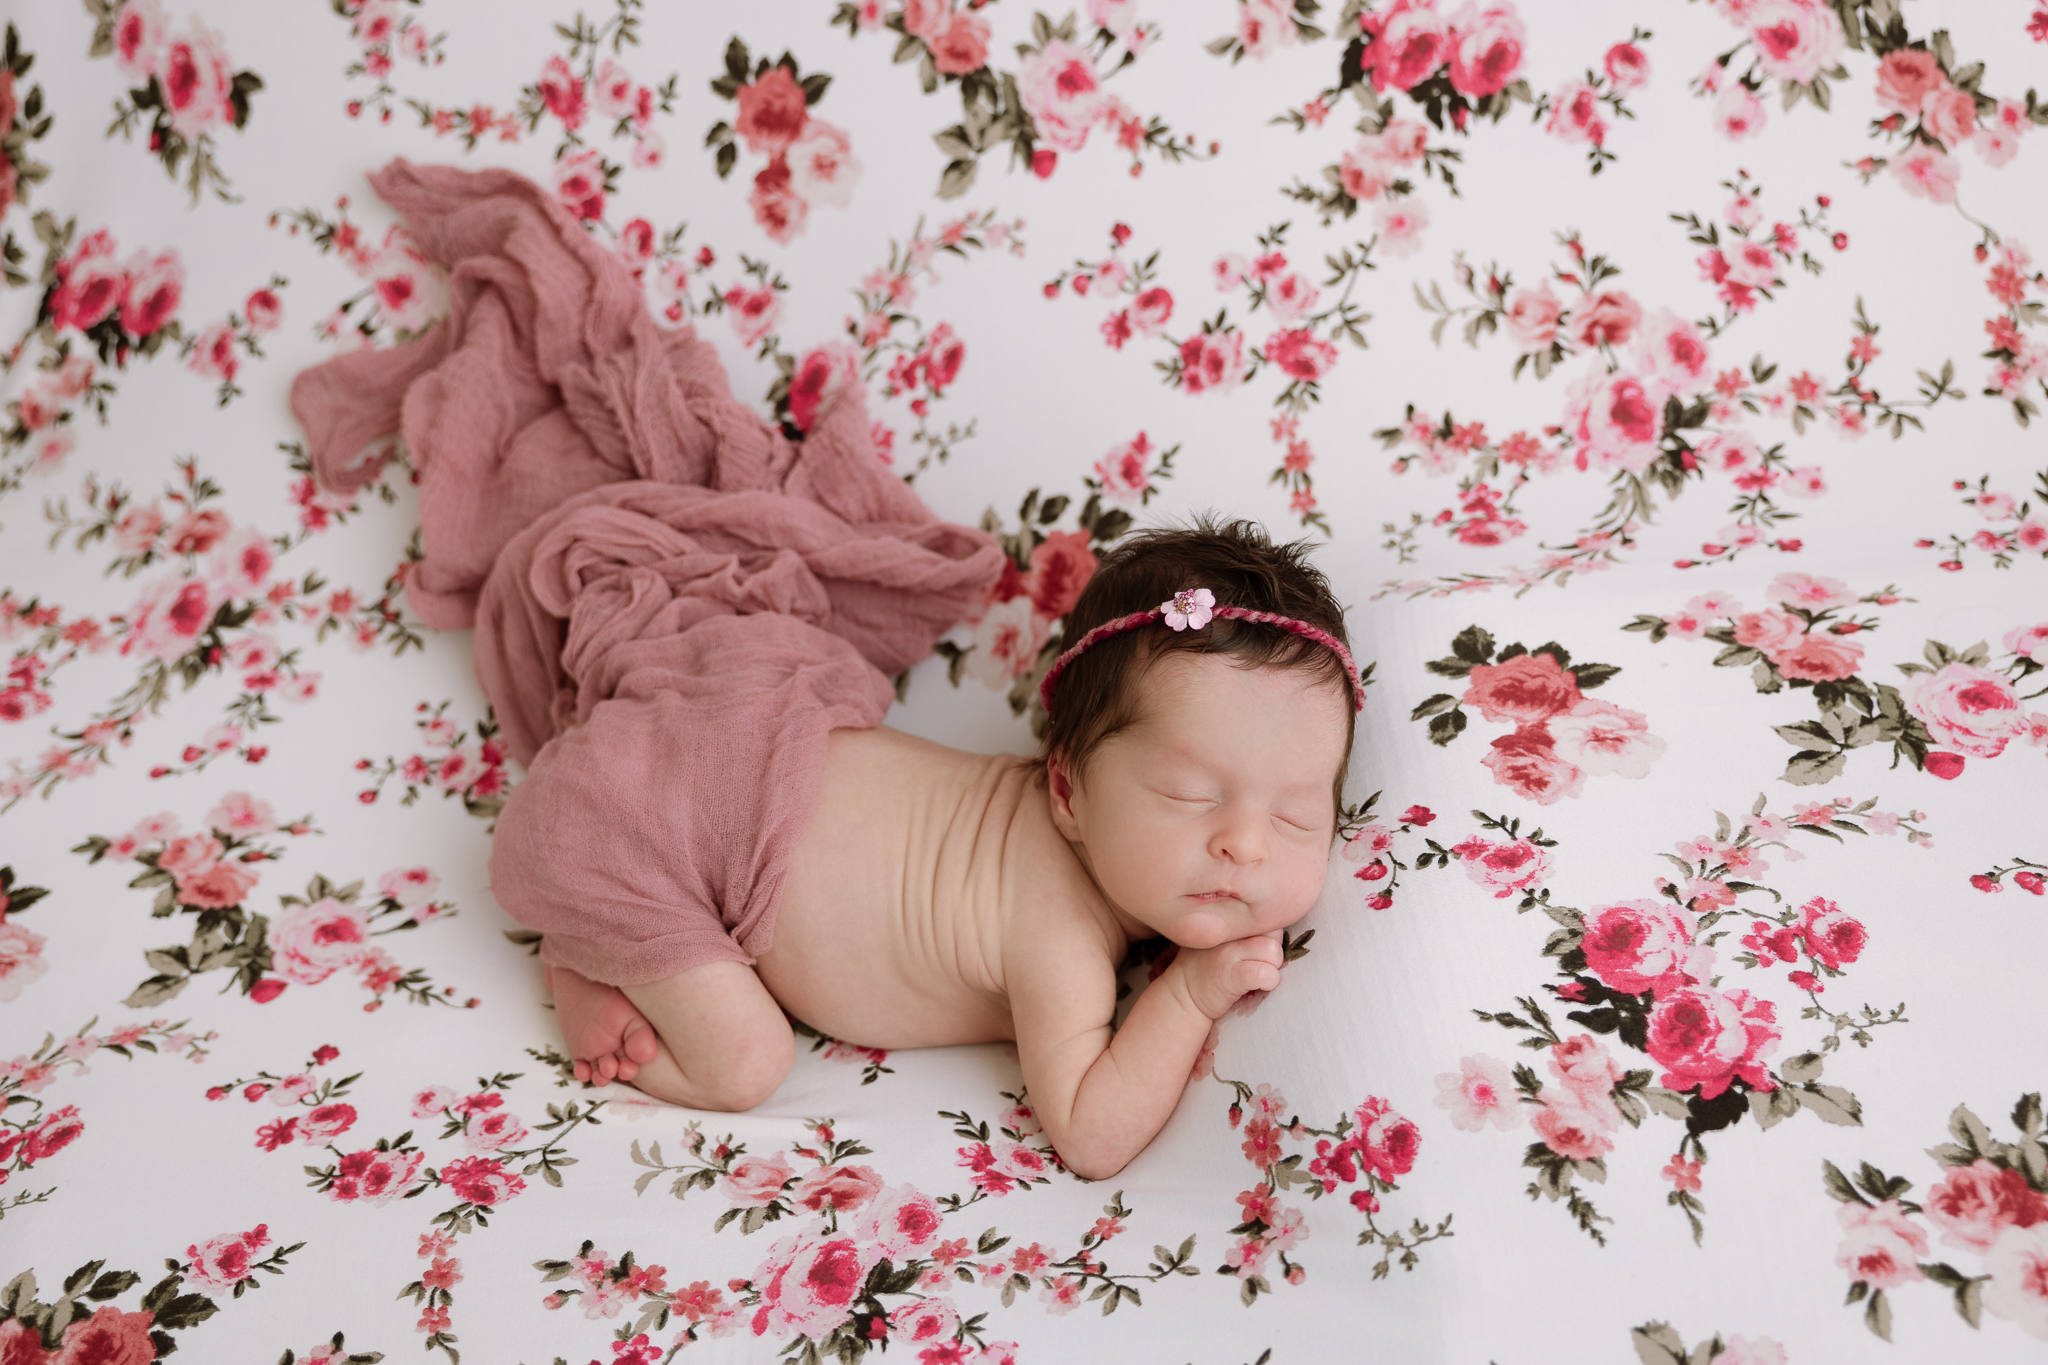 newborn baby girl with pink wrap sleeping on flowered backdrop